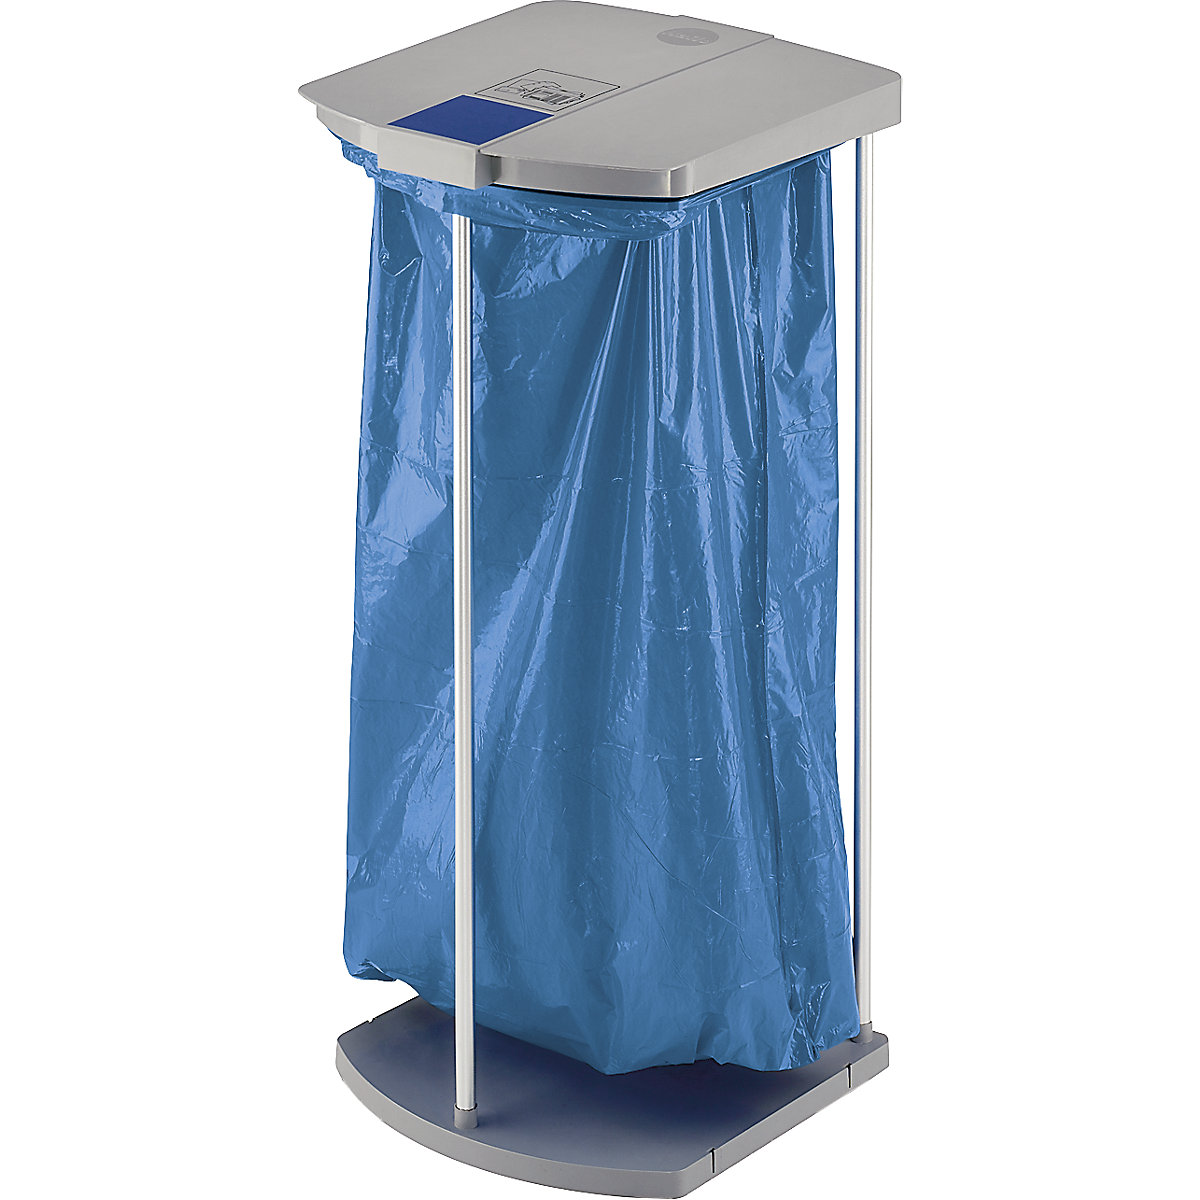 Waste sack stand with 250 blue recycling sacks - Hailo